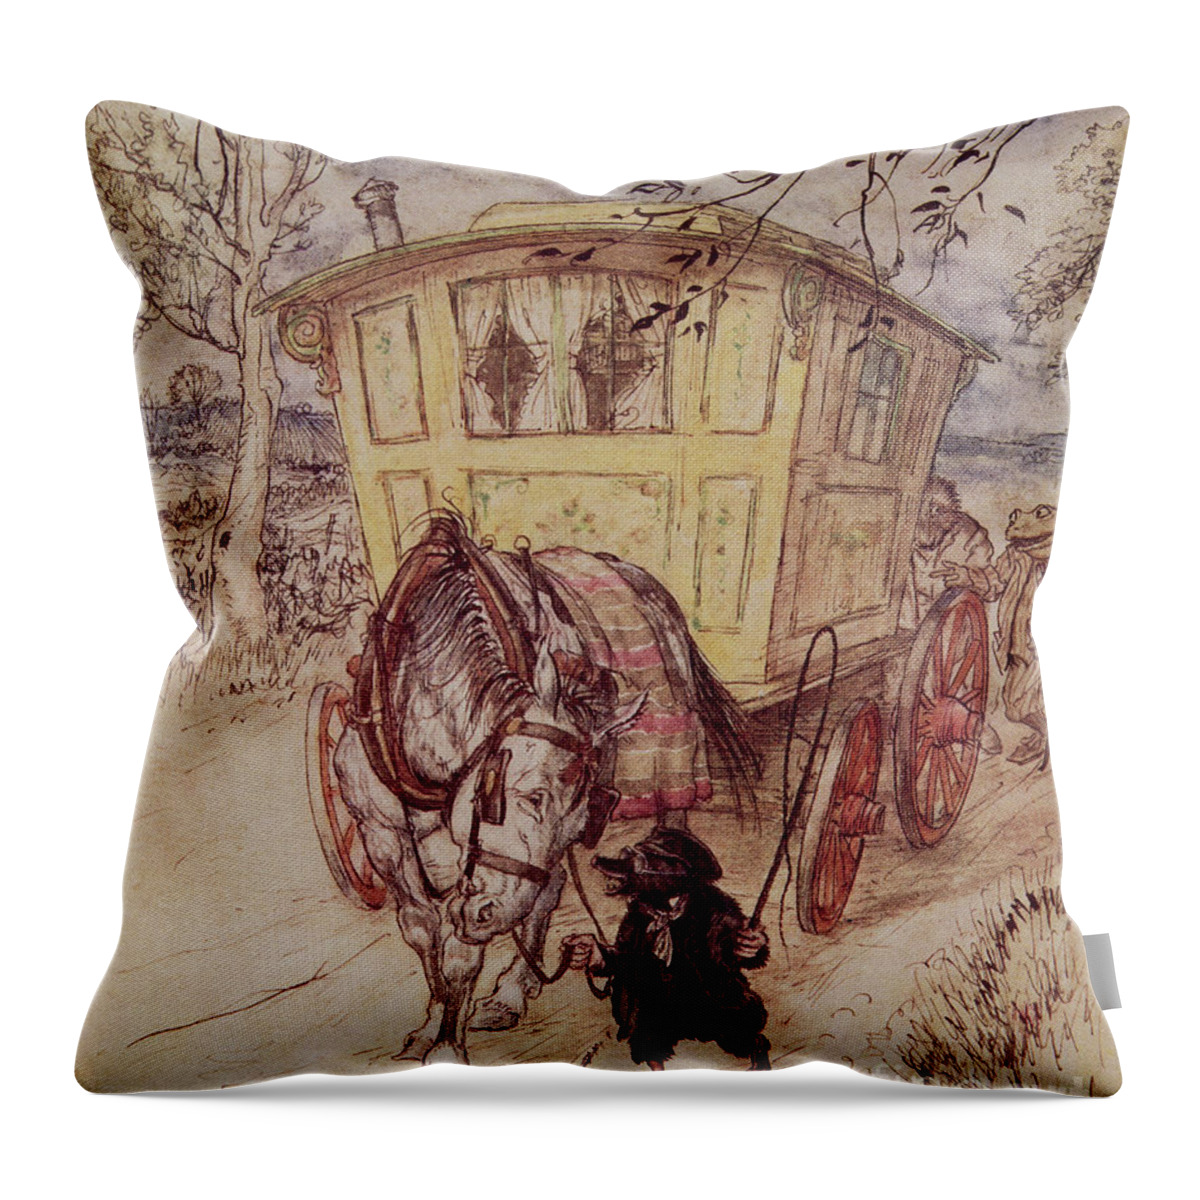 Mr Toad Throw Pillow featuring the painting It was a golden afternoon by Arthur Rackham